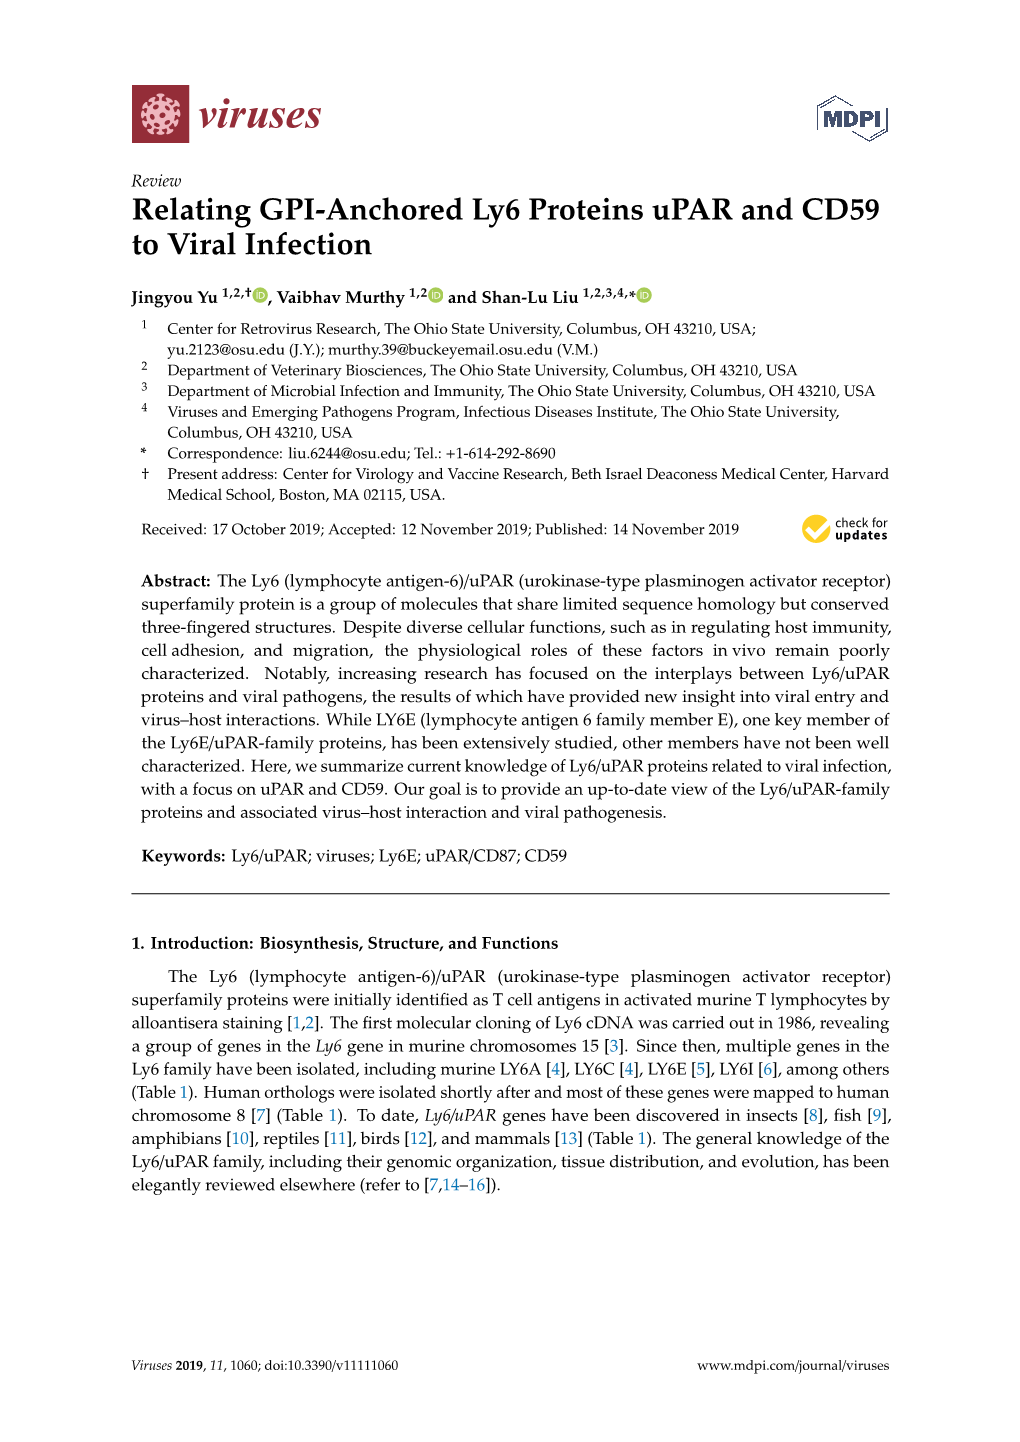 Relating GPI-Anchored Ly6 Proteins Upar and CD59 to Viral Infection